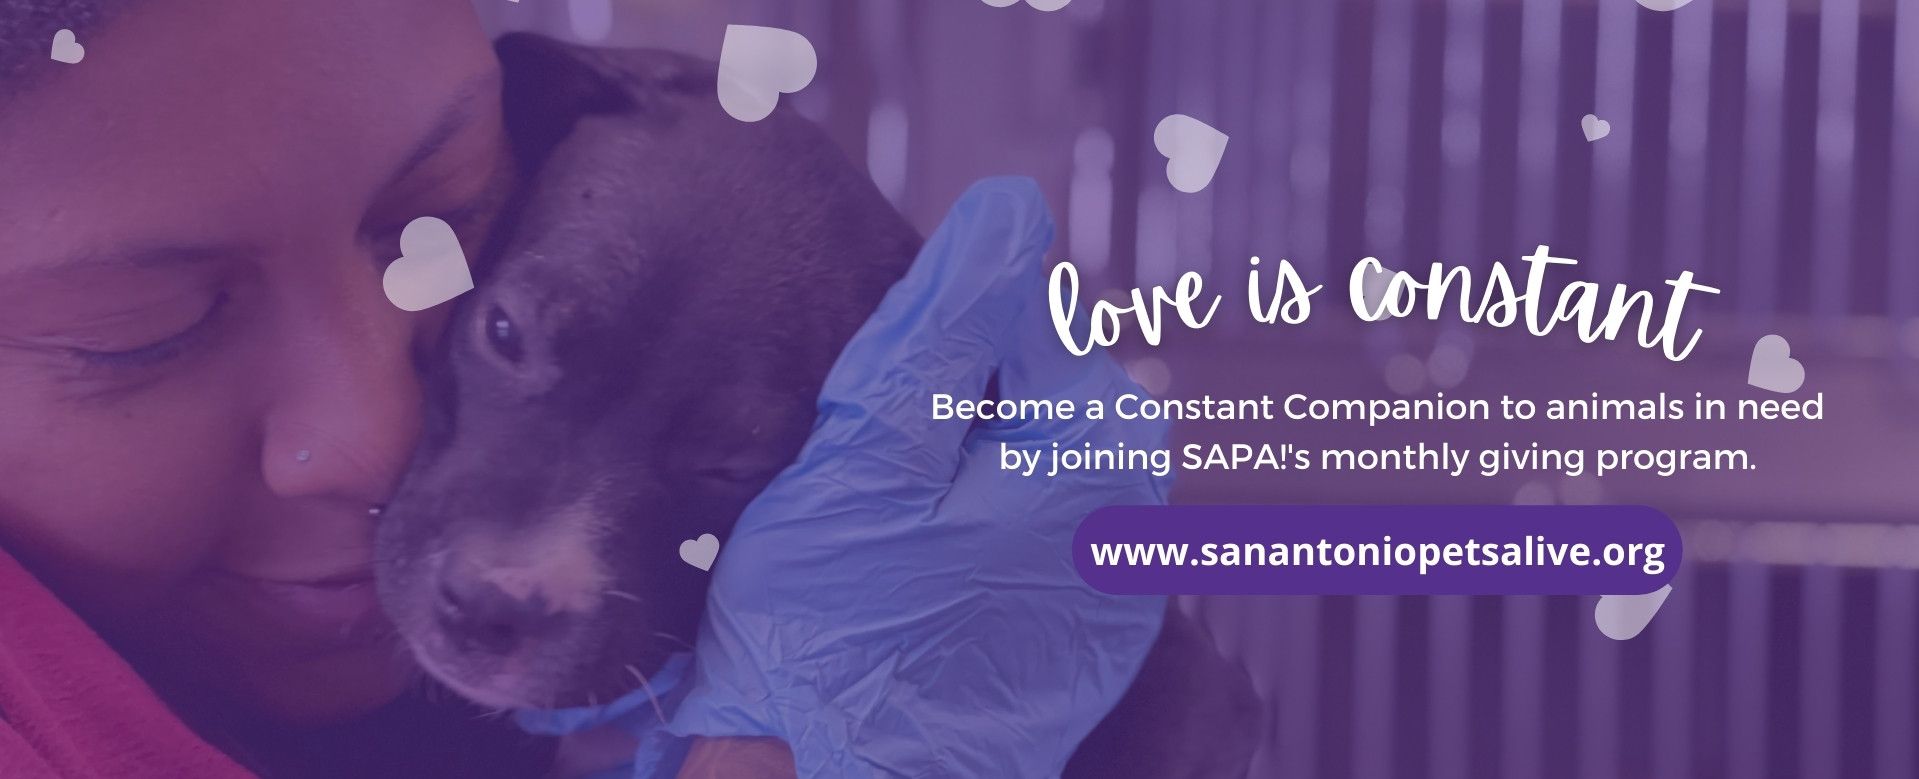 Love is Constant - Become a Constant Companion to animals in need by joining SAPA!'s monthly giving program.